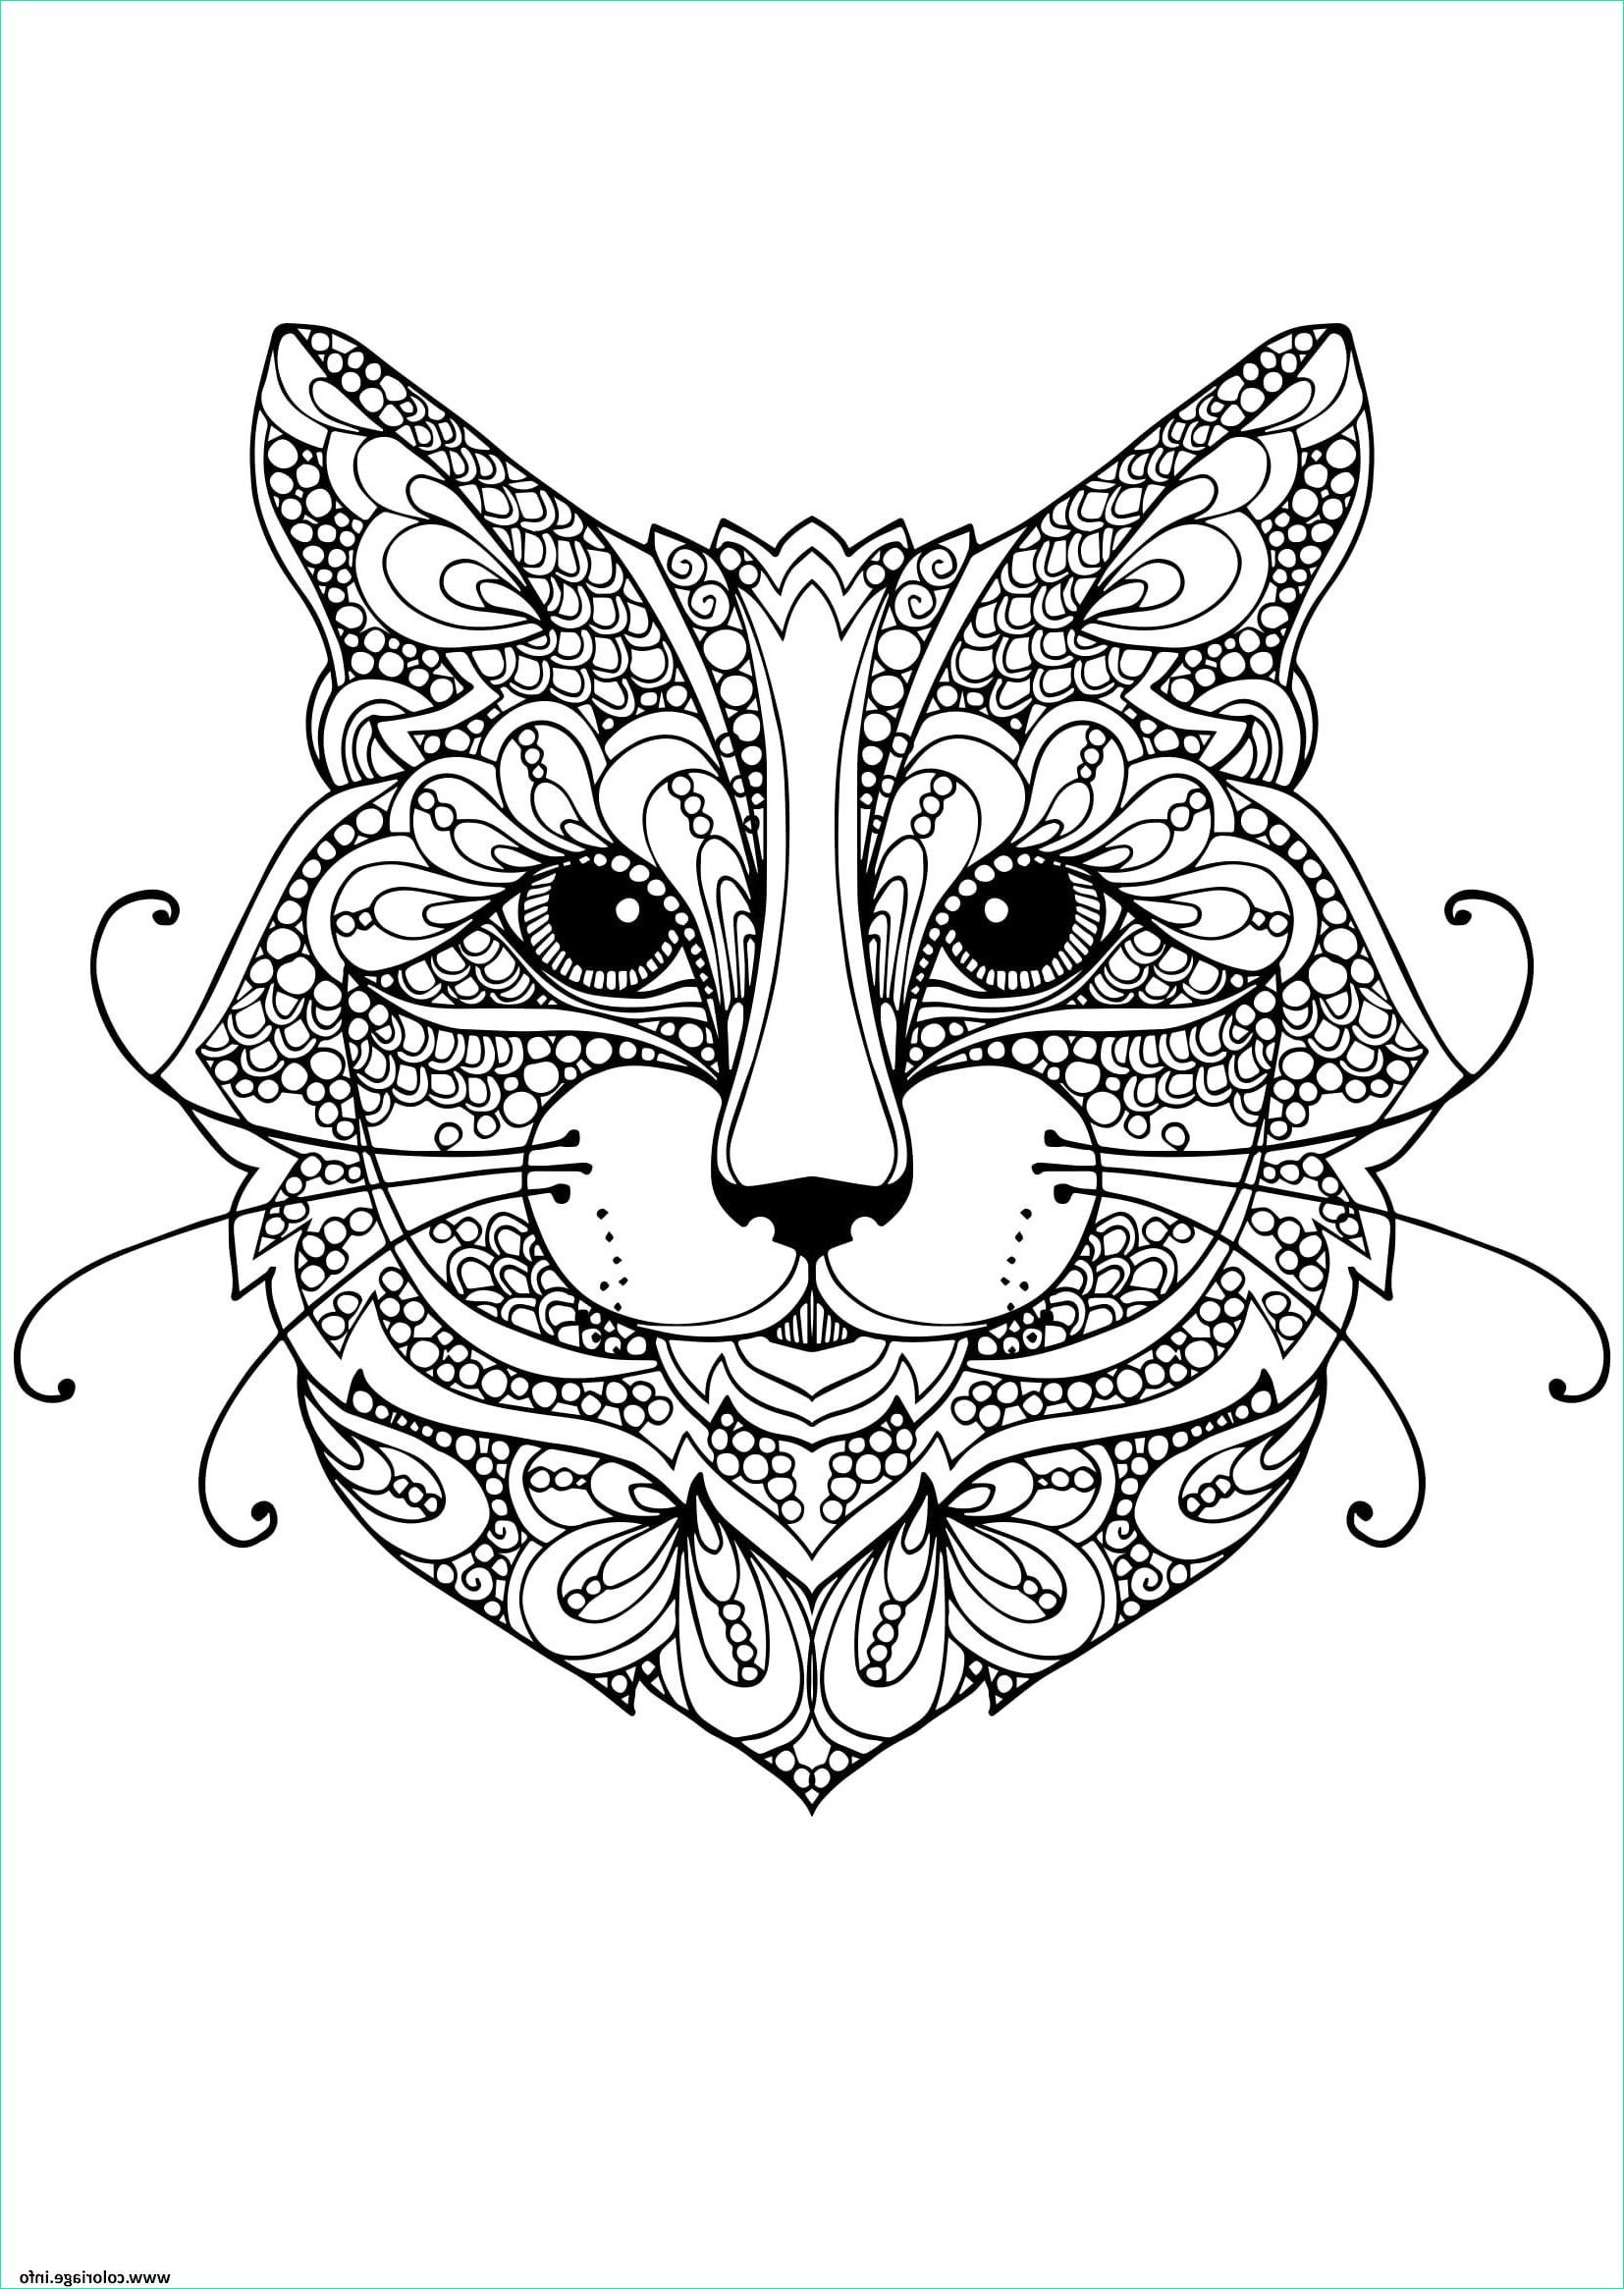 Coloriage Anti Stress Animaux Cool Collection Coloriage Chat Mandala Adulte Anti Stress Dessin